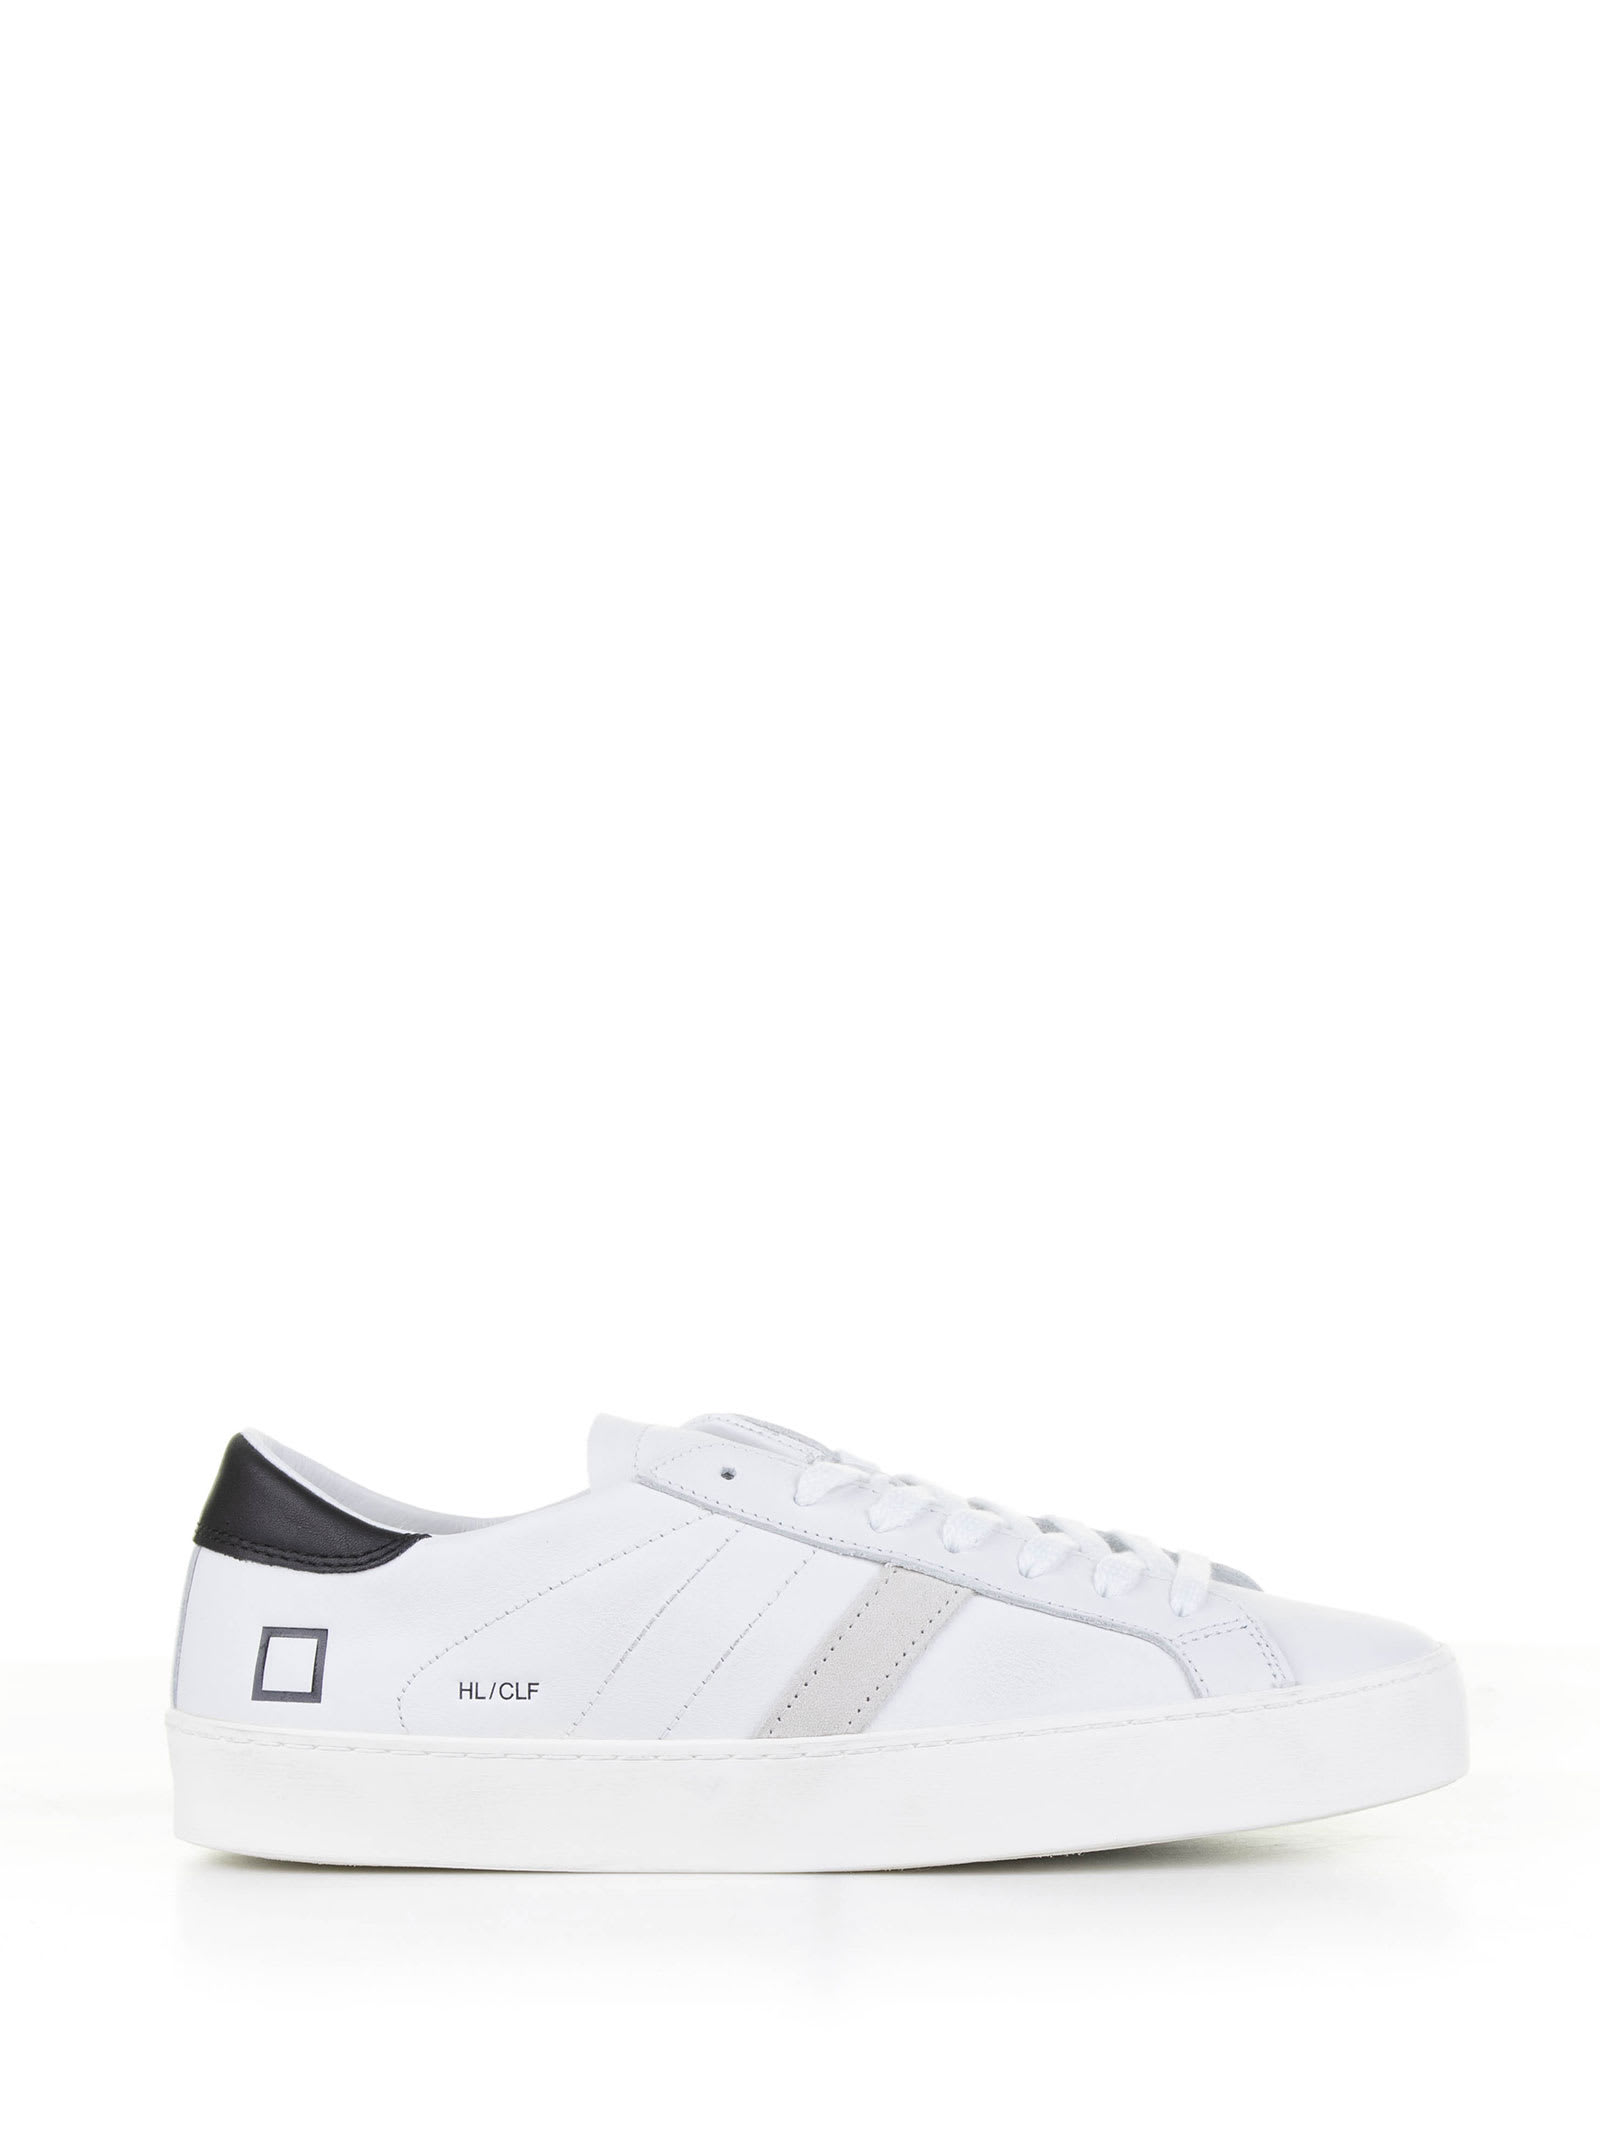 Shop Date Hill Low White Leather Sneaker